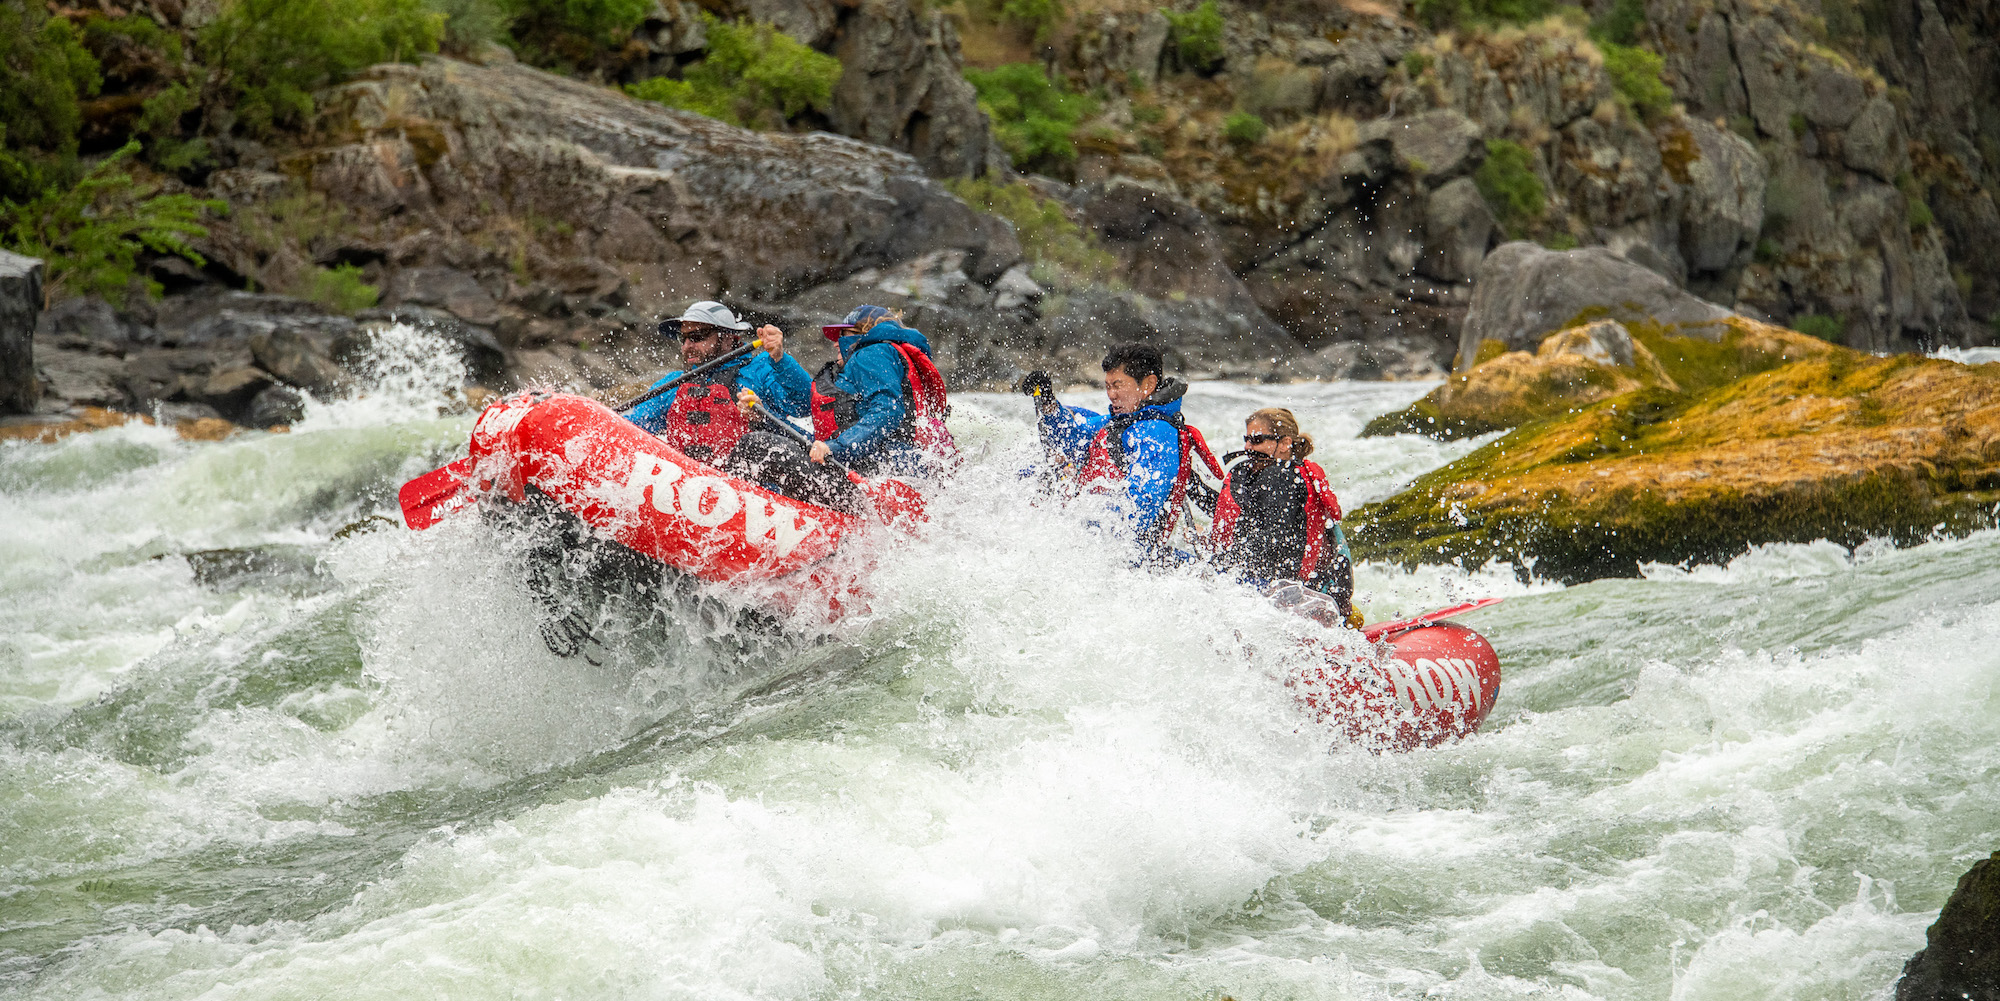 A group of people on a red raft paddling through a class IV rapid on the Snake River through Hells Canyon